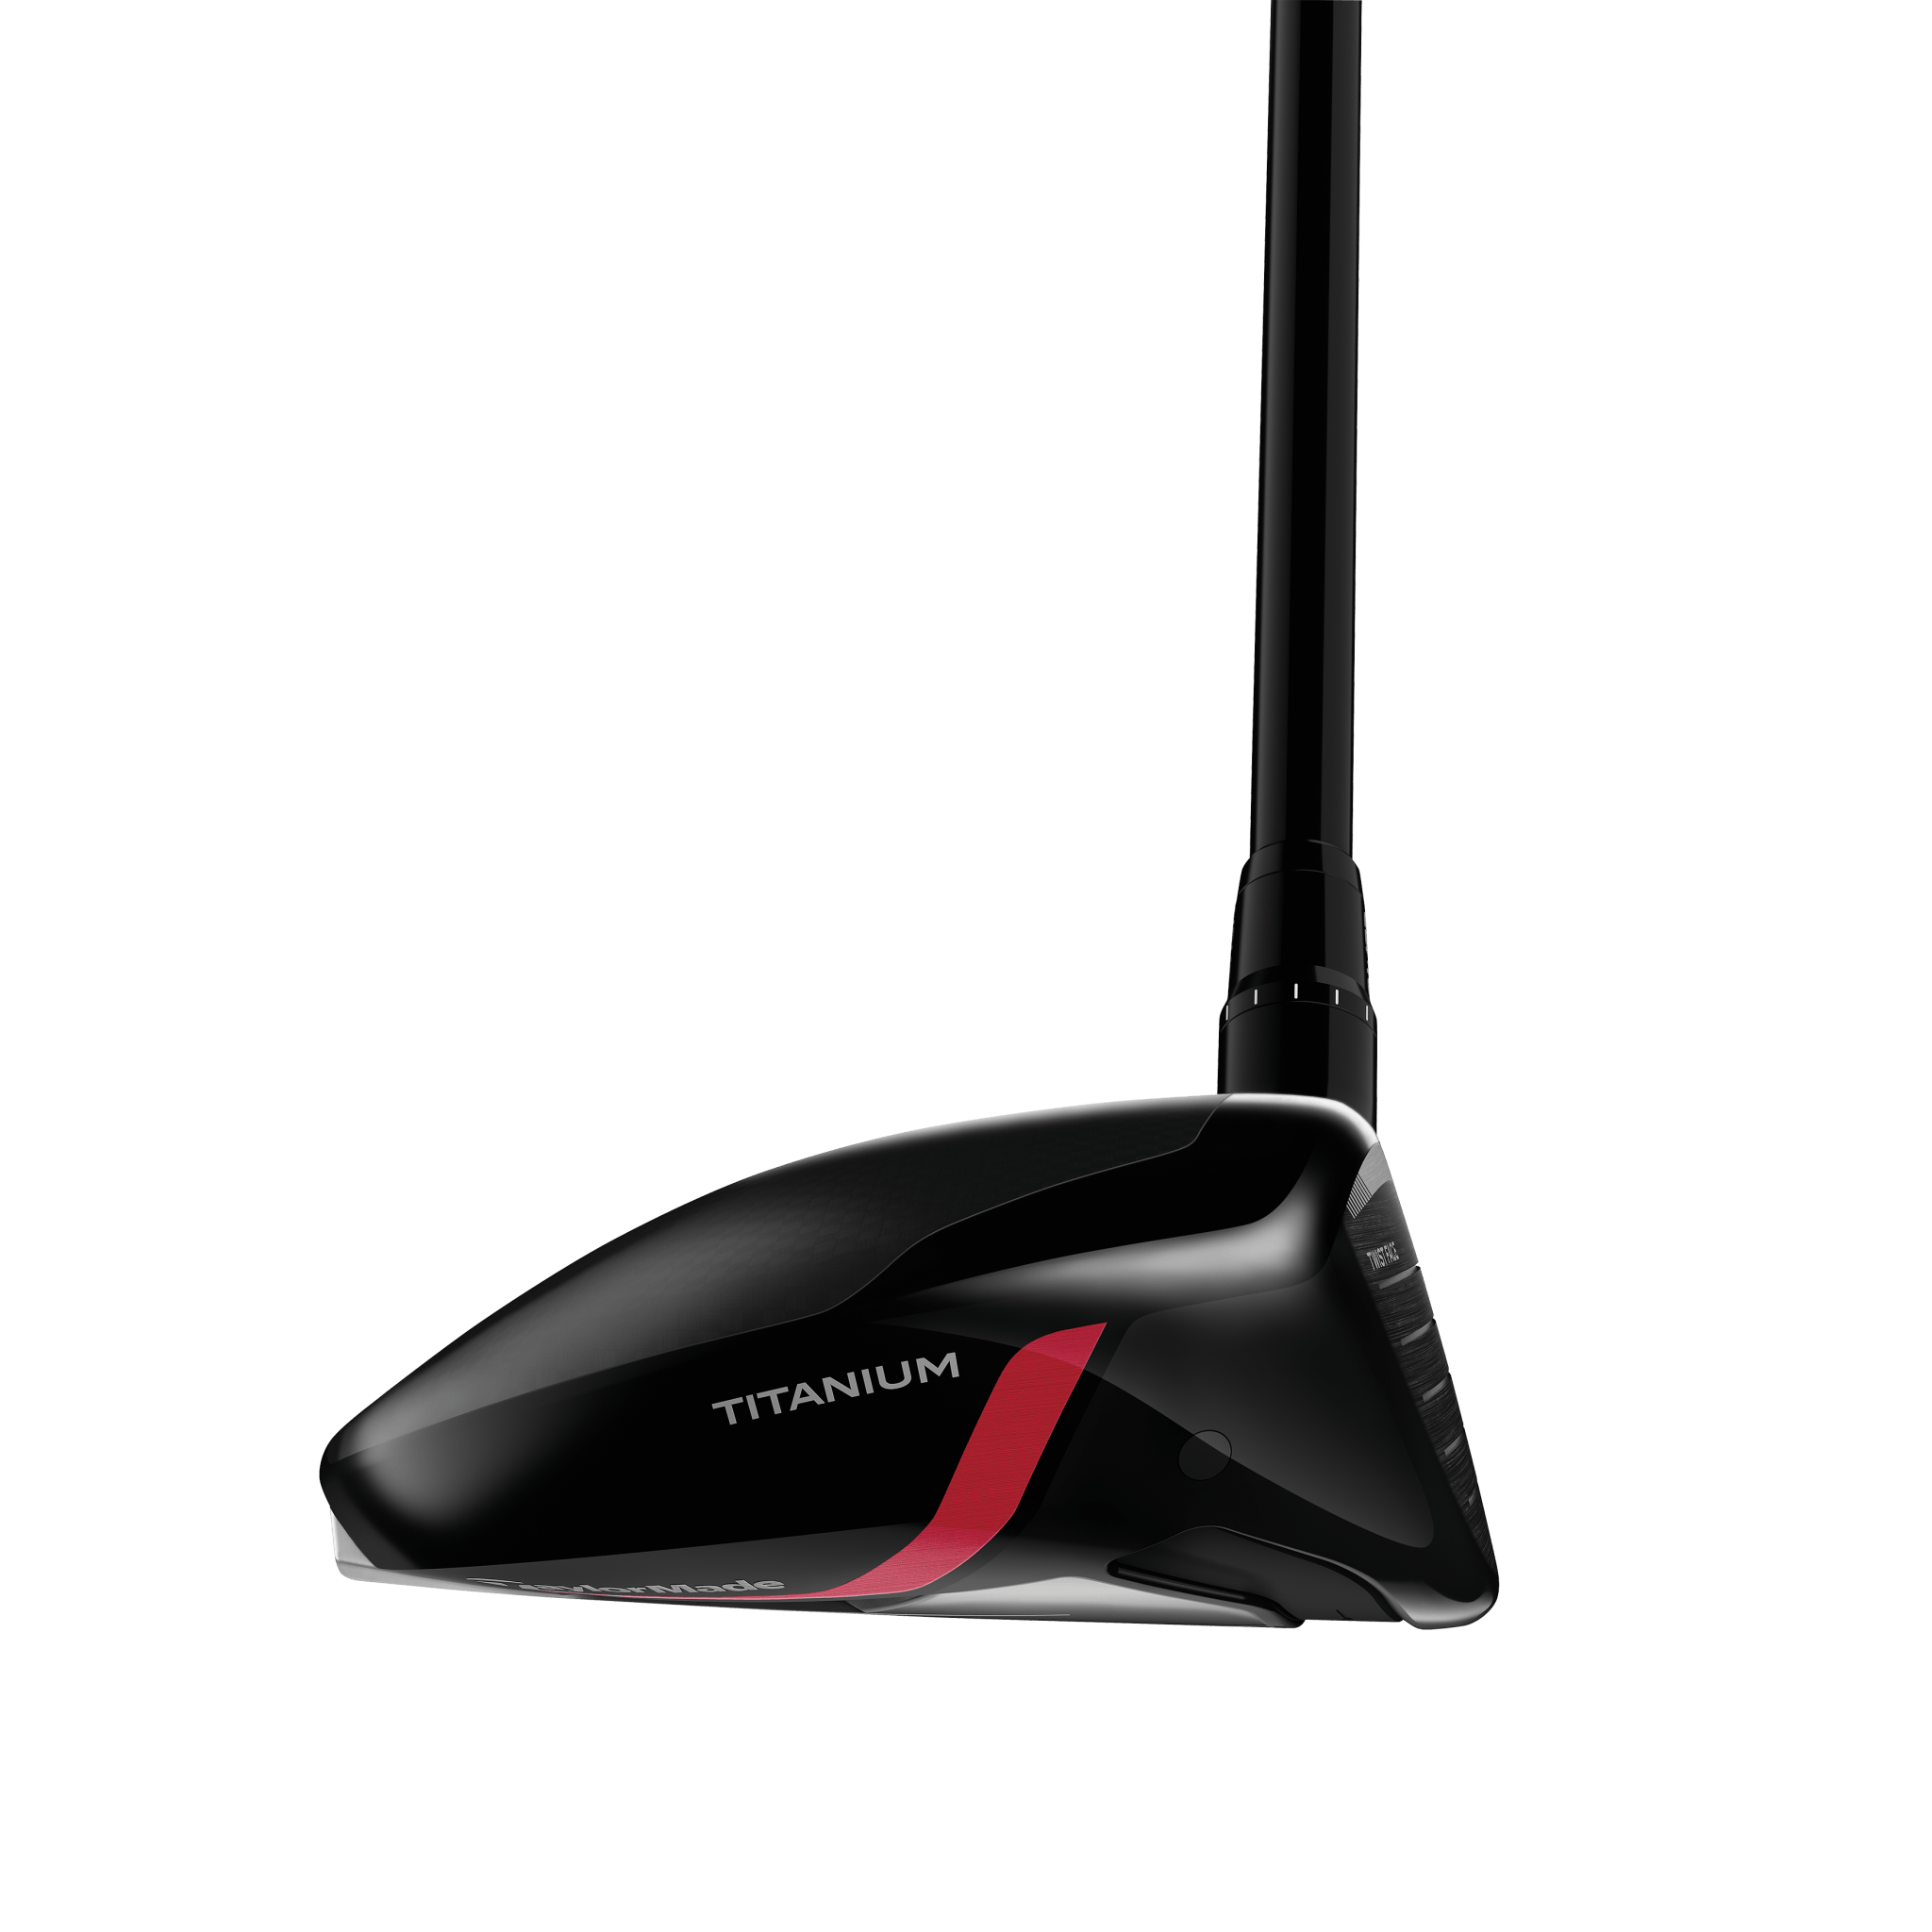 TaylorMade Stealth Plus+ Fairway Wood · Right handed · Stiff · 5W